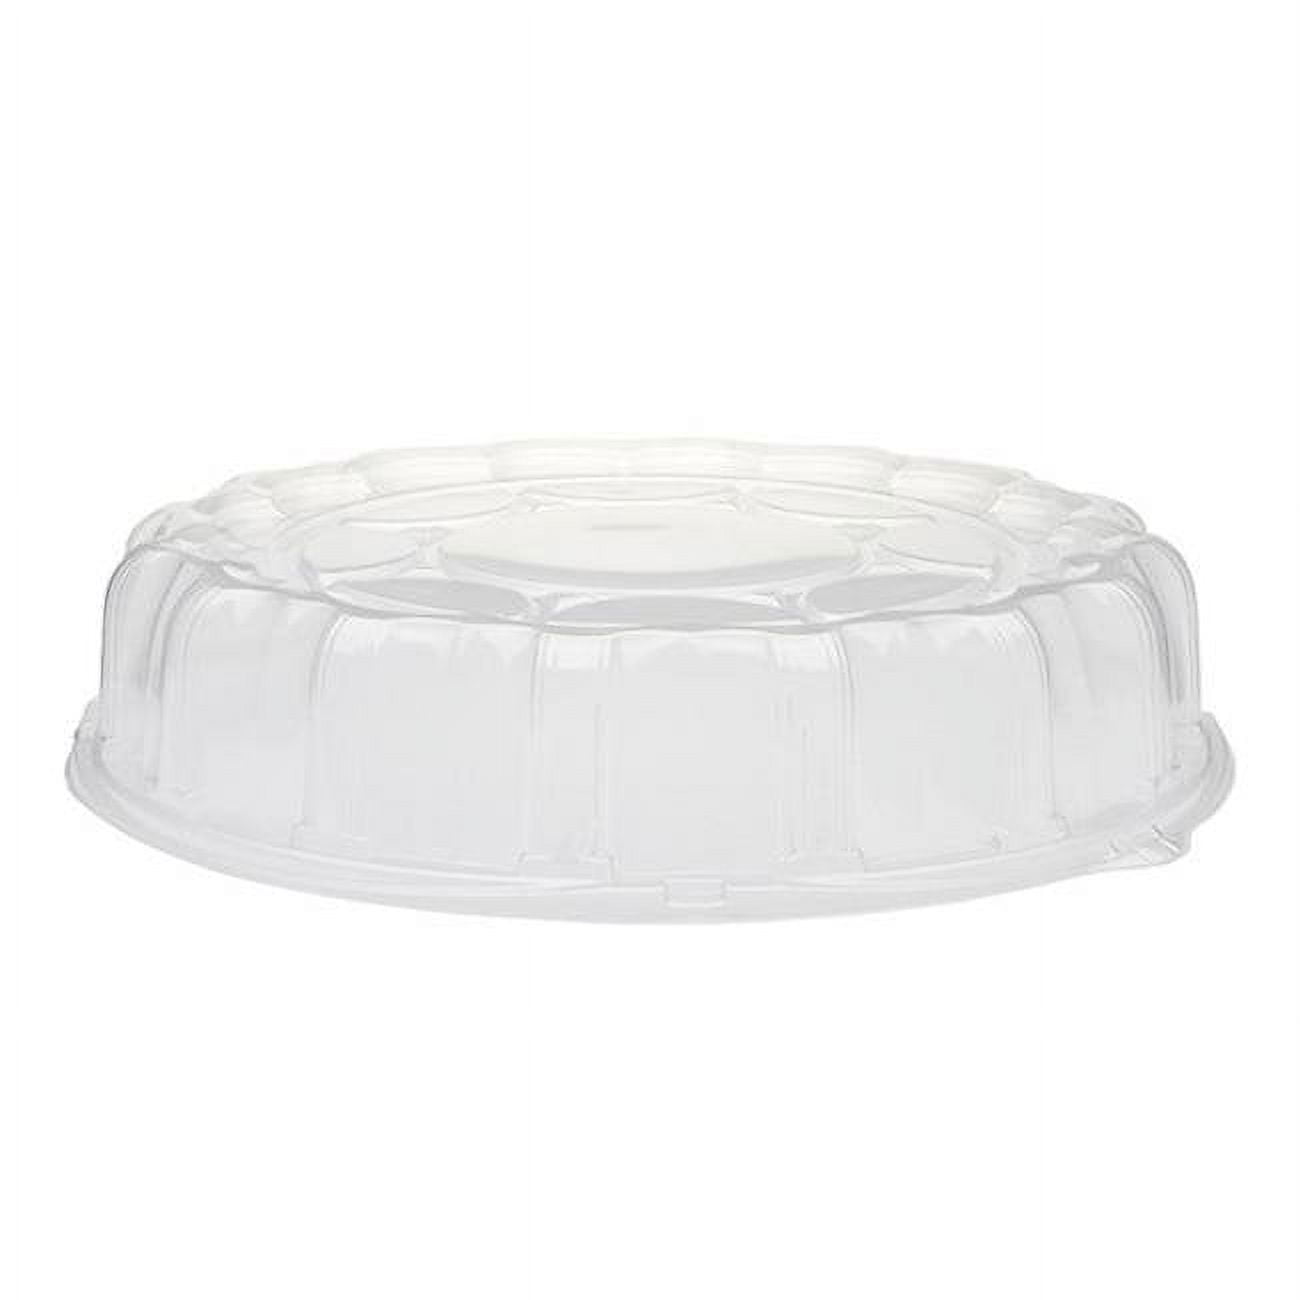 Picture of Pactiv Corporation P9816Y Lid Catering Tray, Case Of 50 - 16 in.